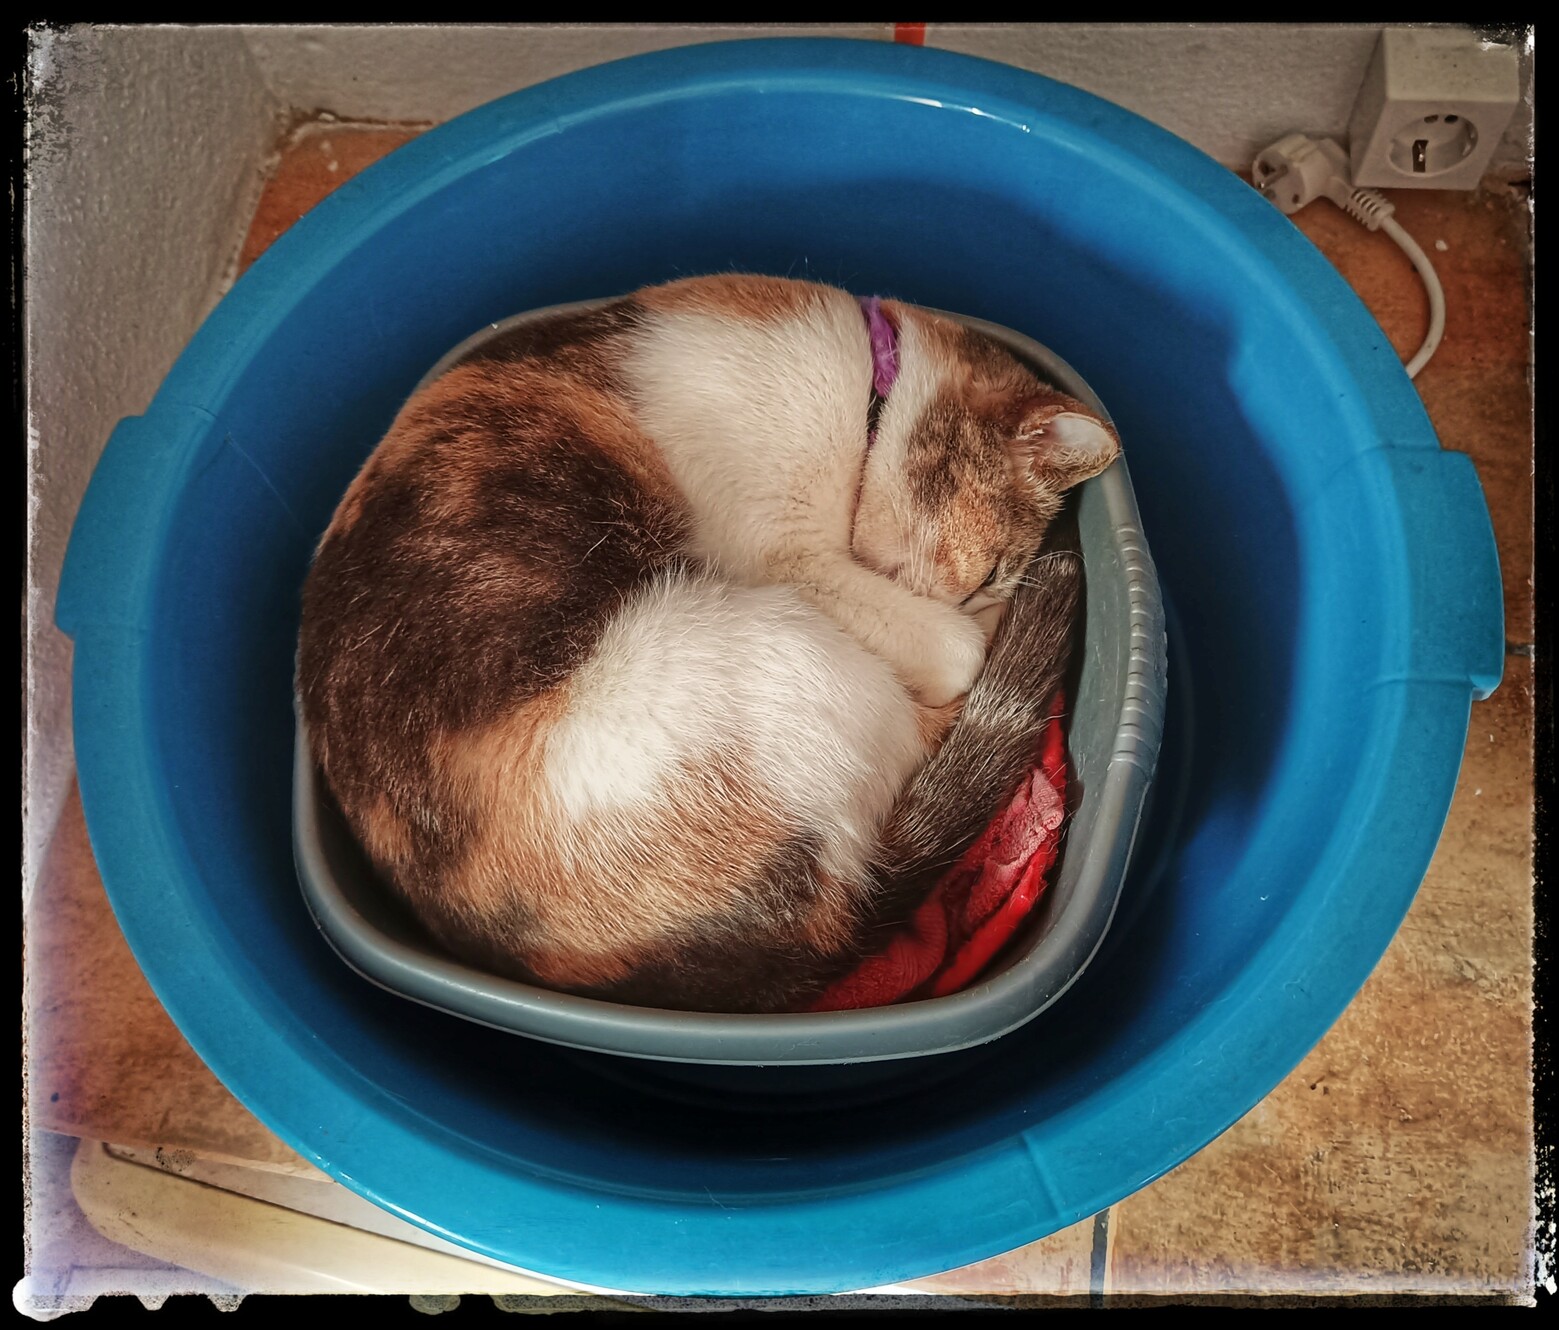 A tri coloured cat curled up asleep in a bowl that is inside a larger bowl